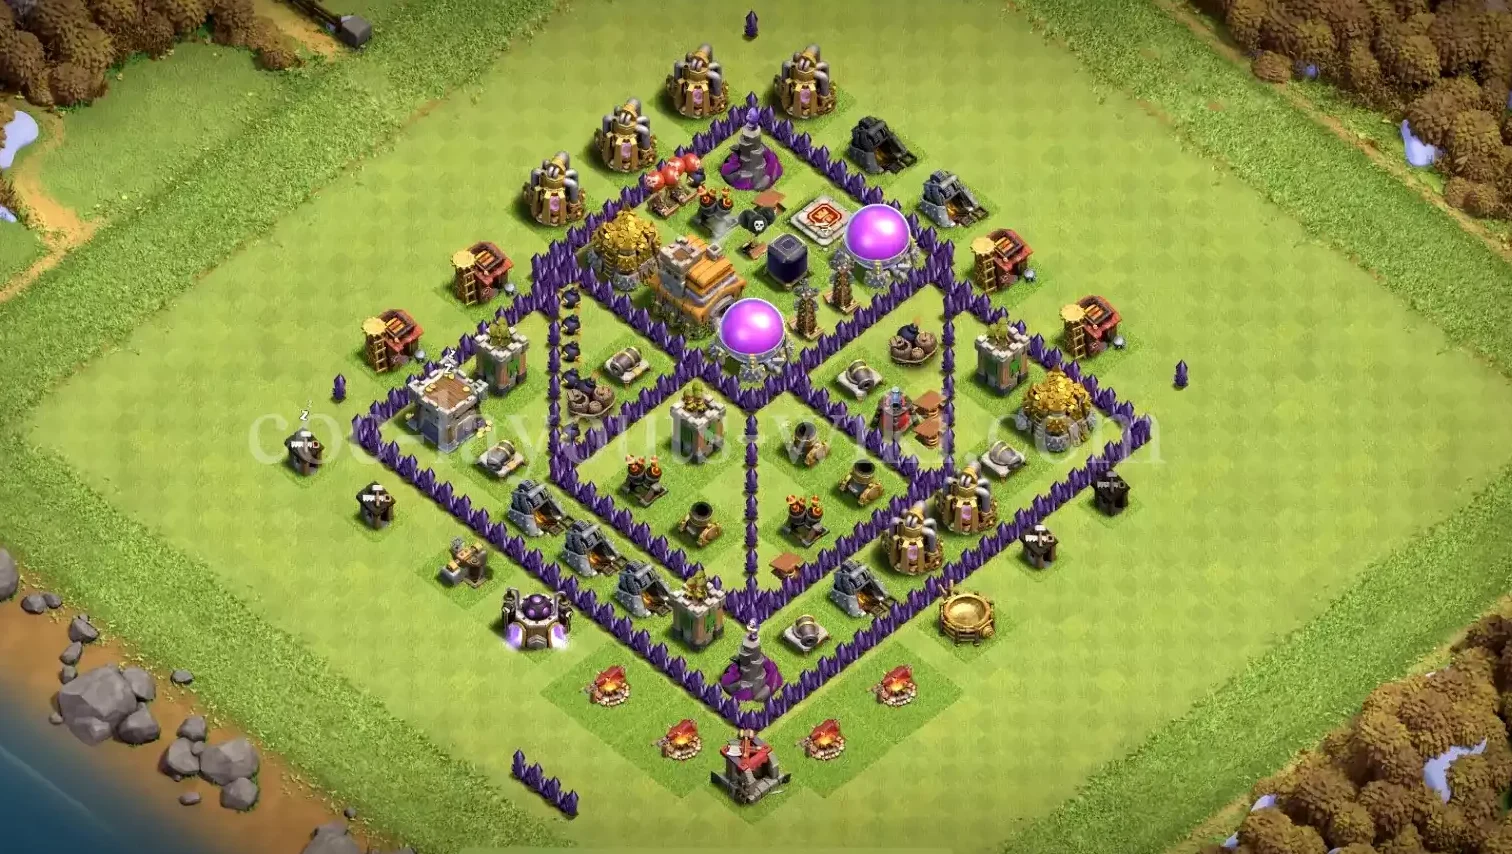 TH7 3D Art Base with Copy Link #7